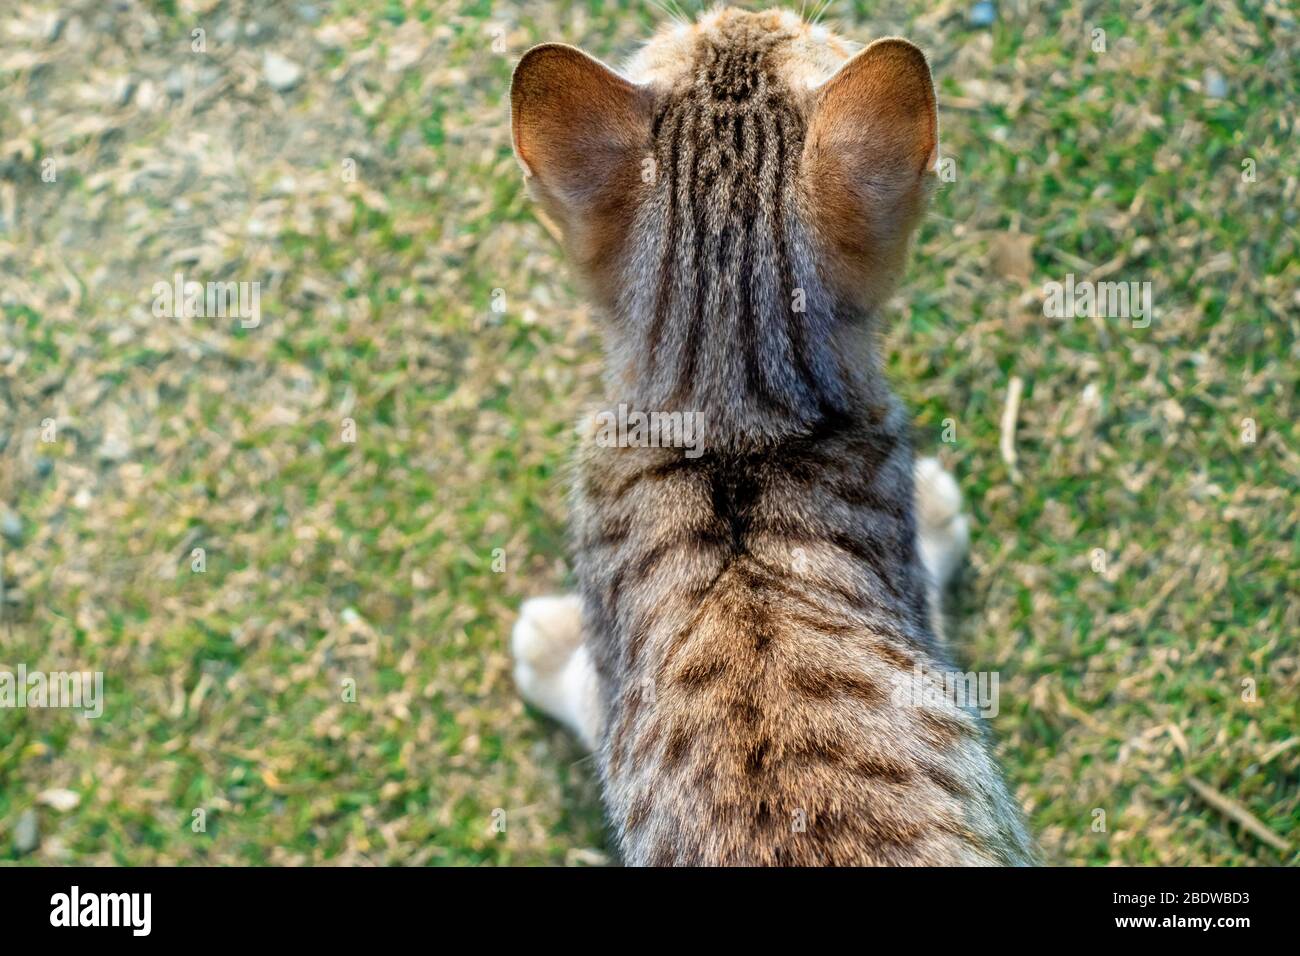 Top View of Cat Sitting on Green Grass at Summer Nature Background. Kitten Pet Outdoors on Sunny Day, Adorable Cat with Light Brown, Grey and White Fu Stock Photo